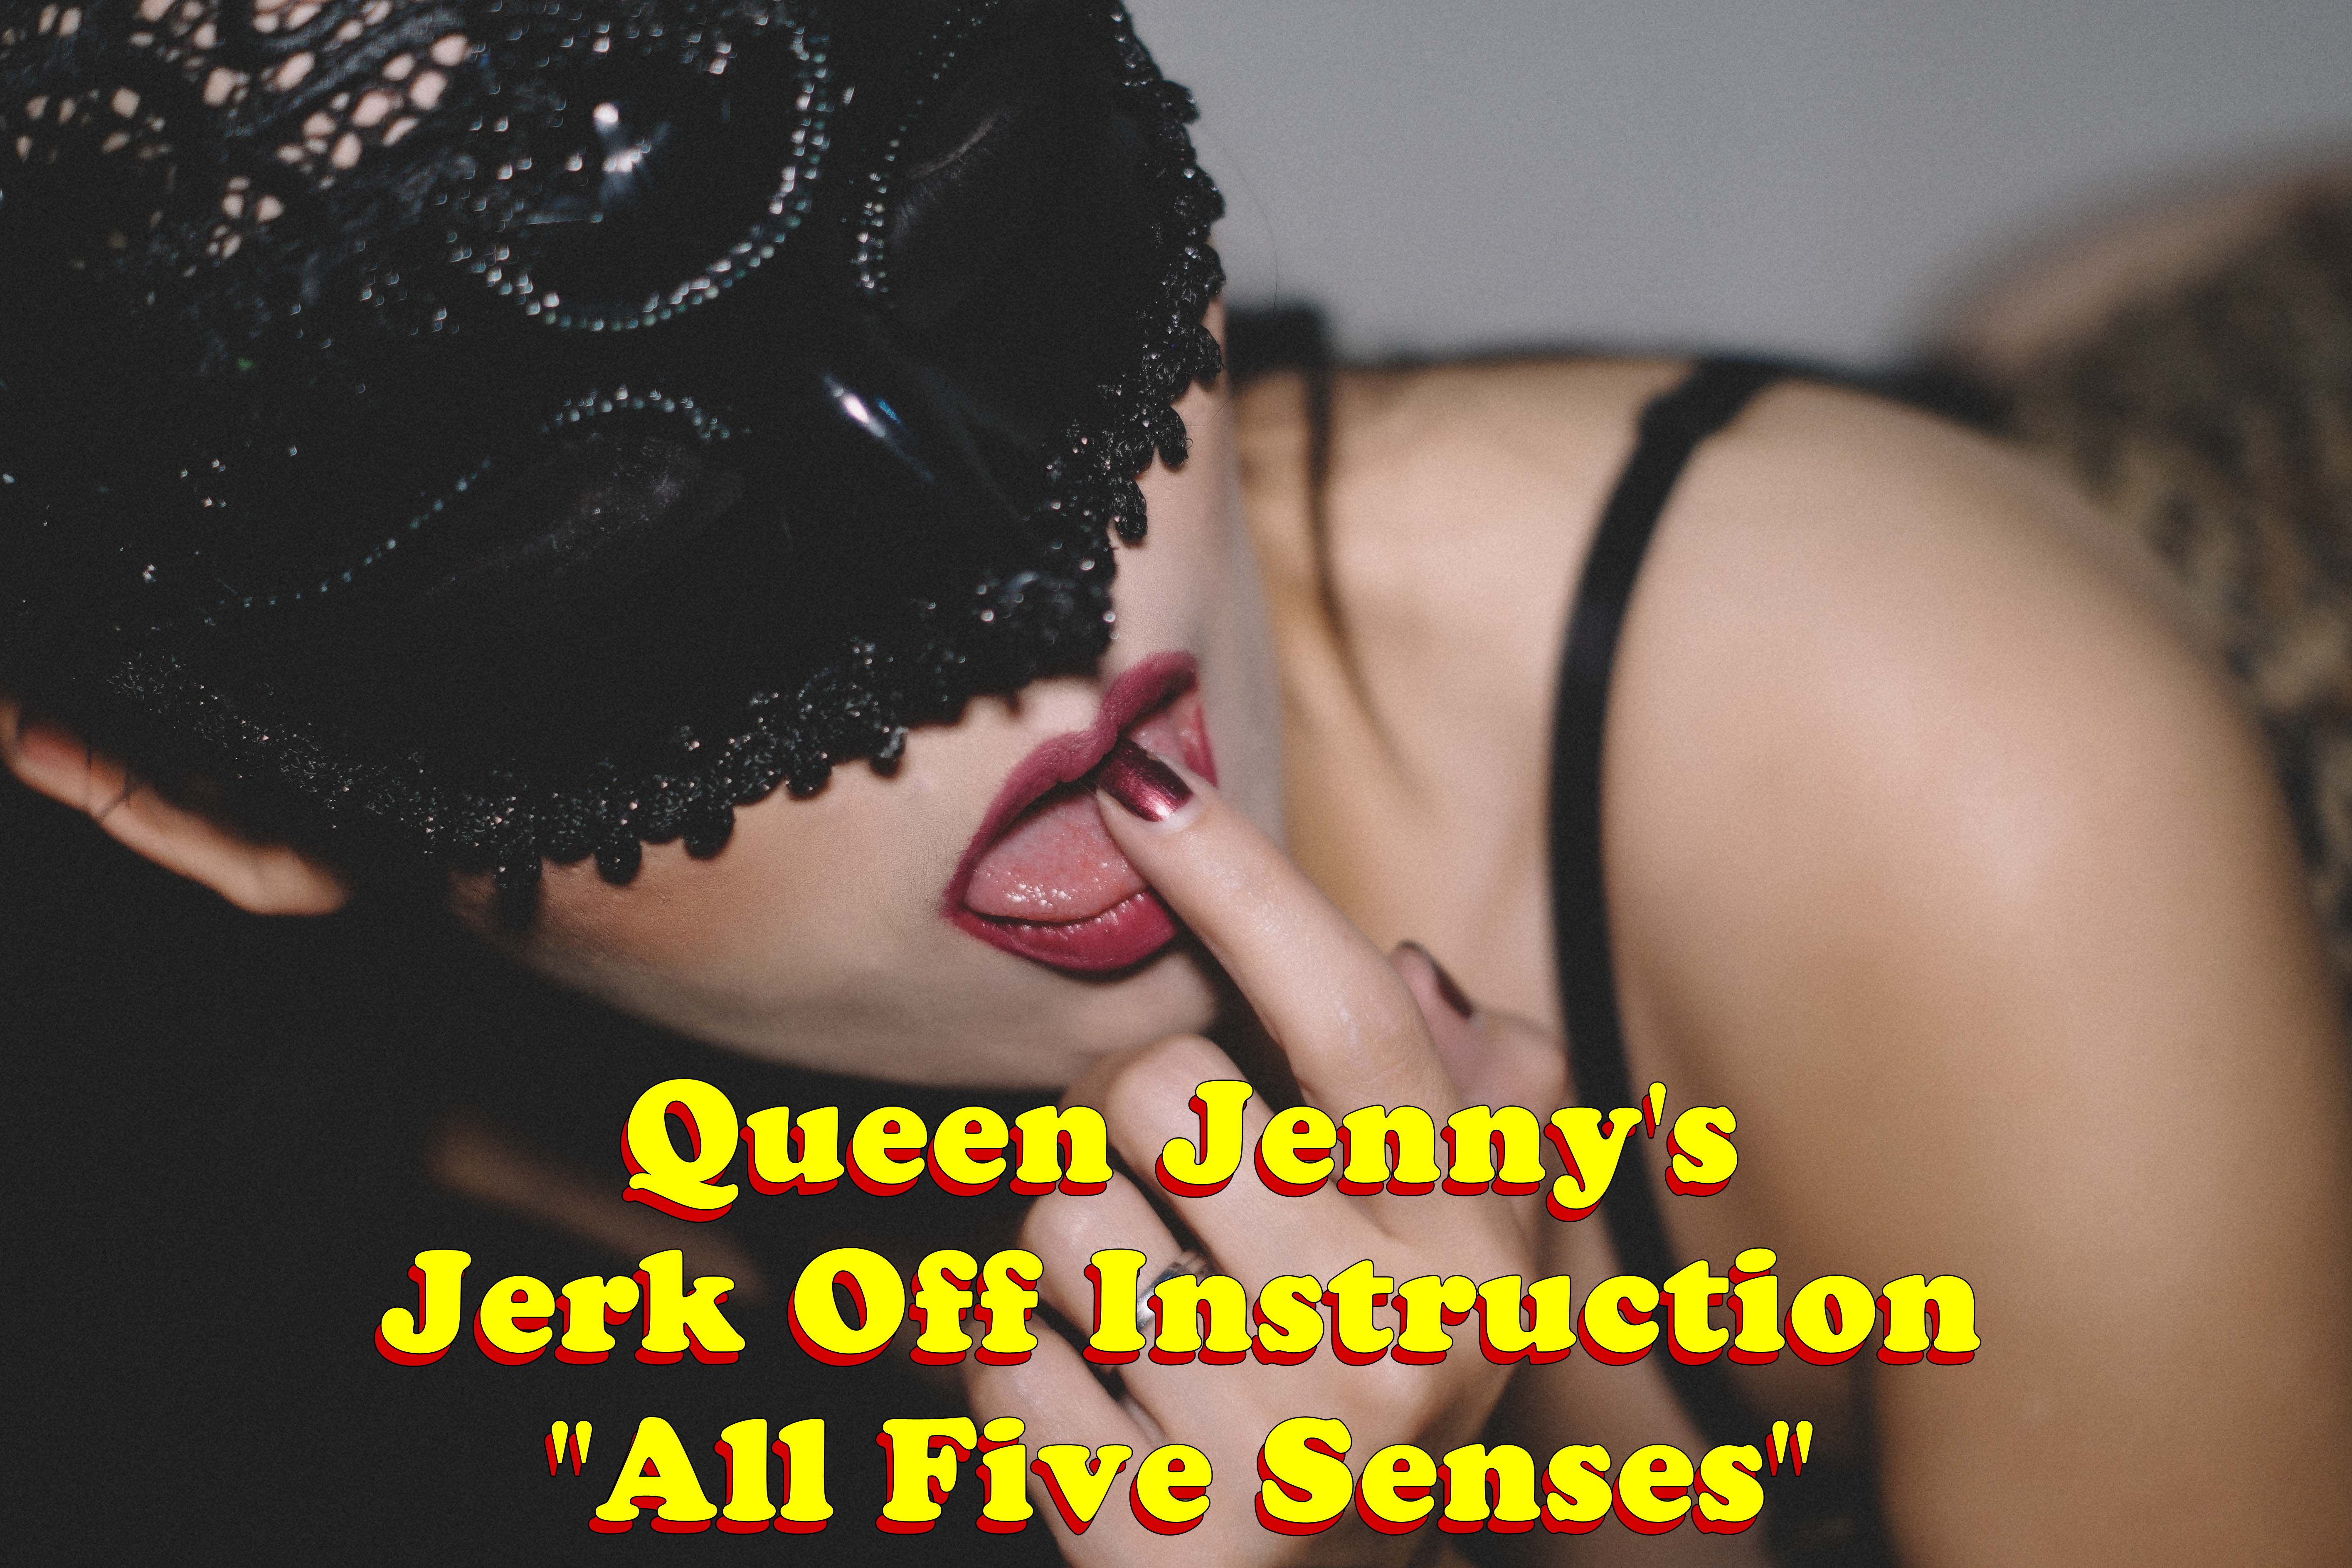 Jerk Off Instruction – “All Five Senses” by Queen Jenny XoXo